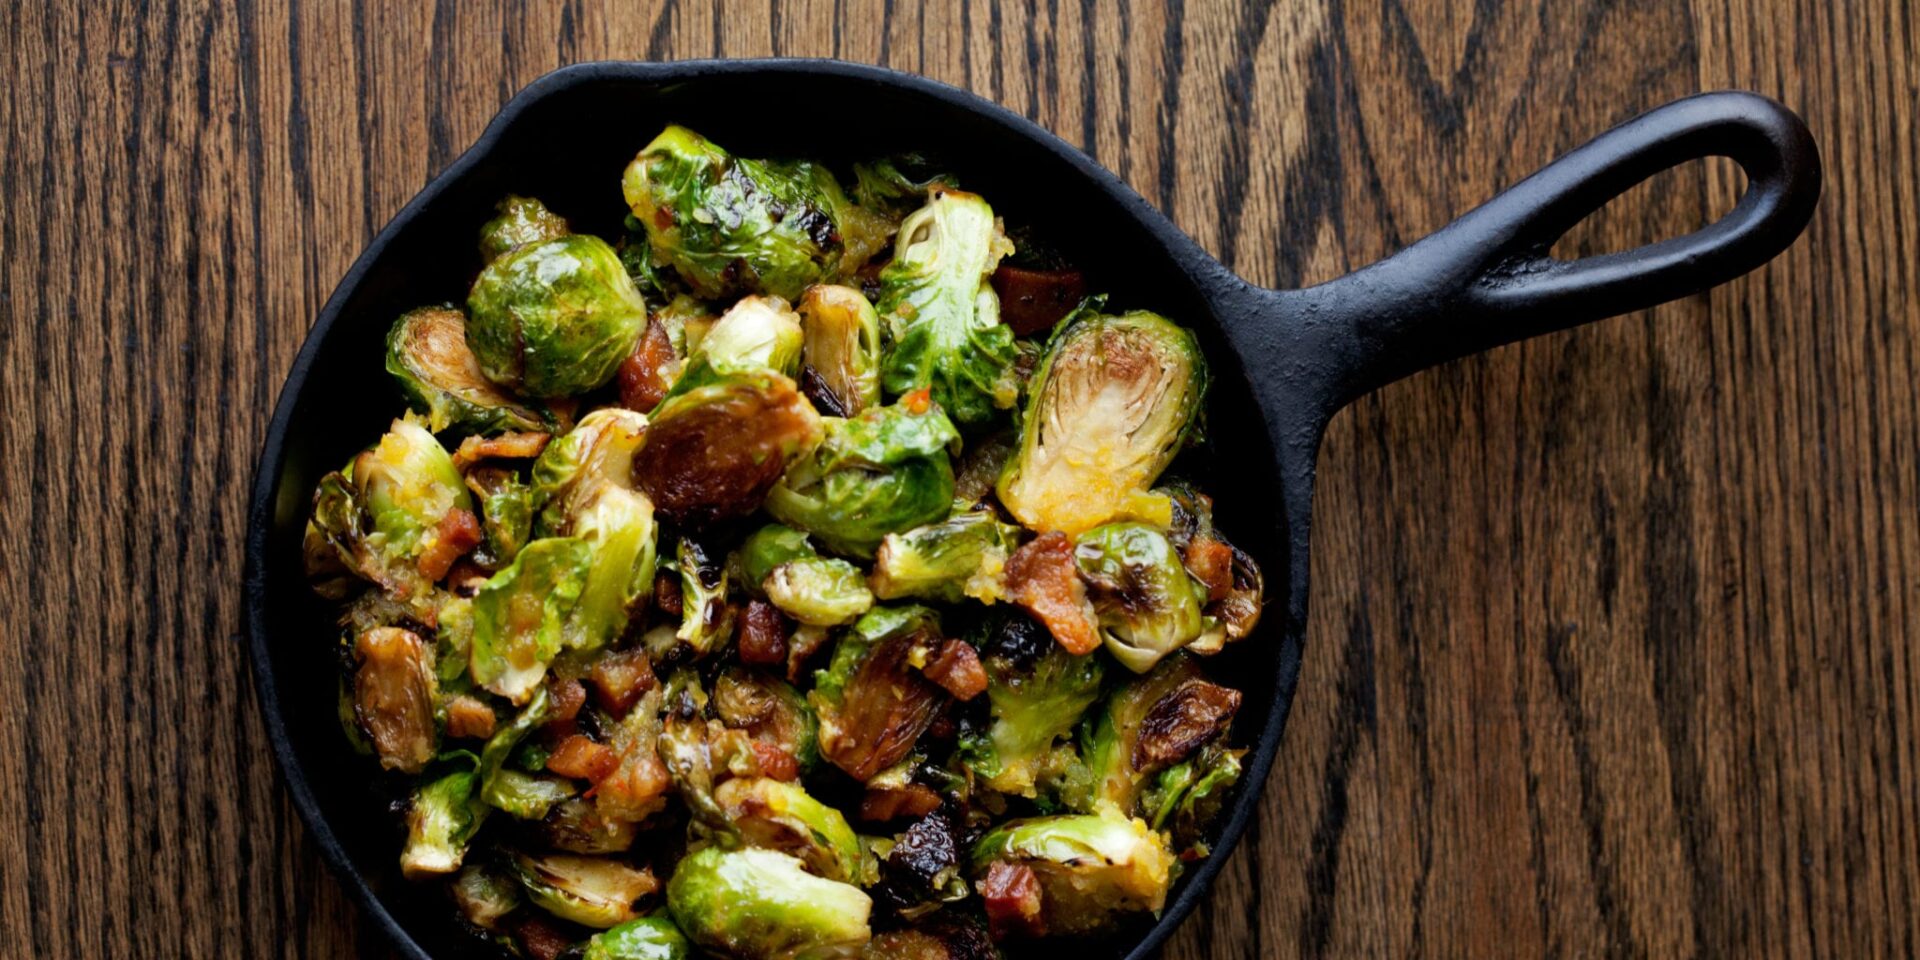 Bentons-Bacon-Roasted-Brussels-Sprouts-with-Chow-Chow-Vinaigrette_Hero.jpg